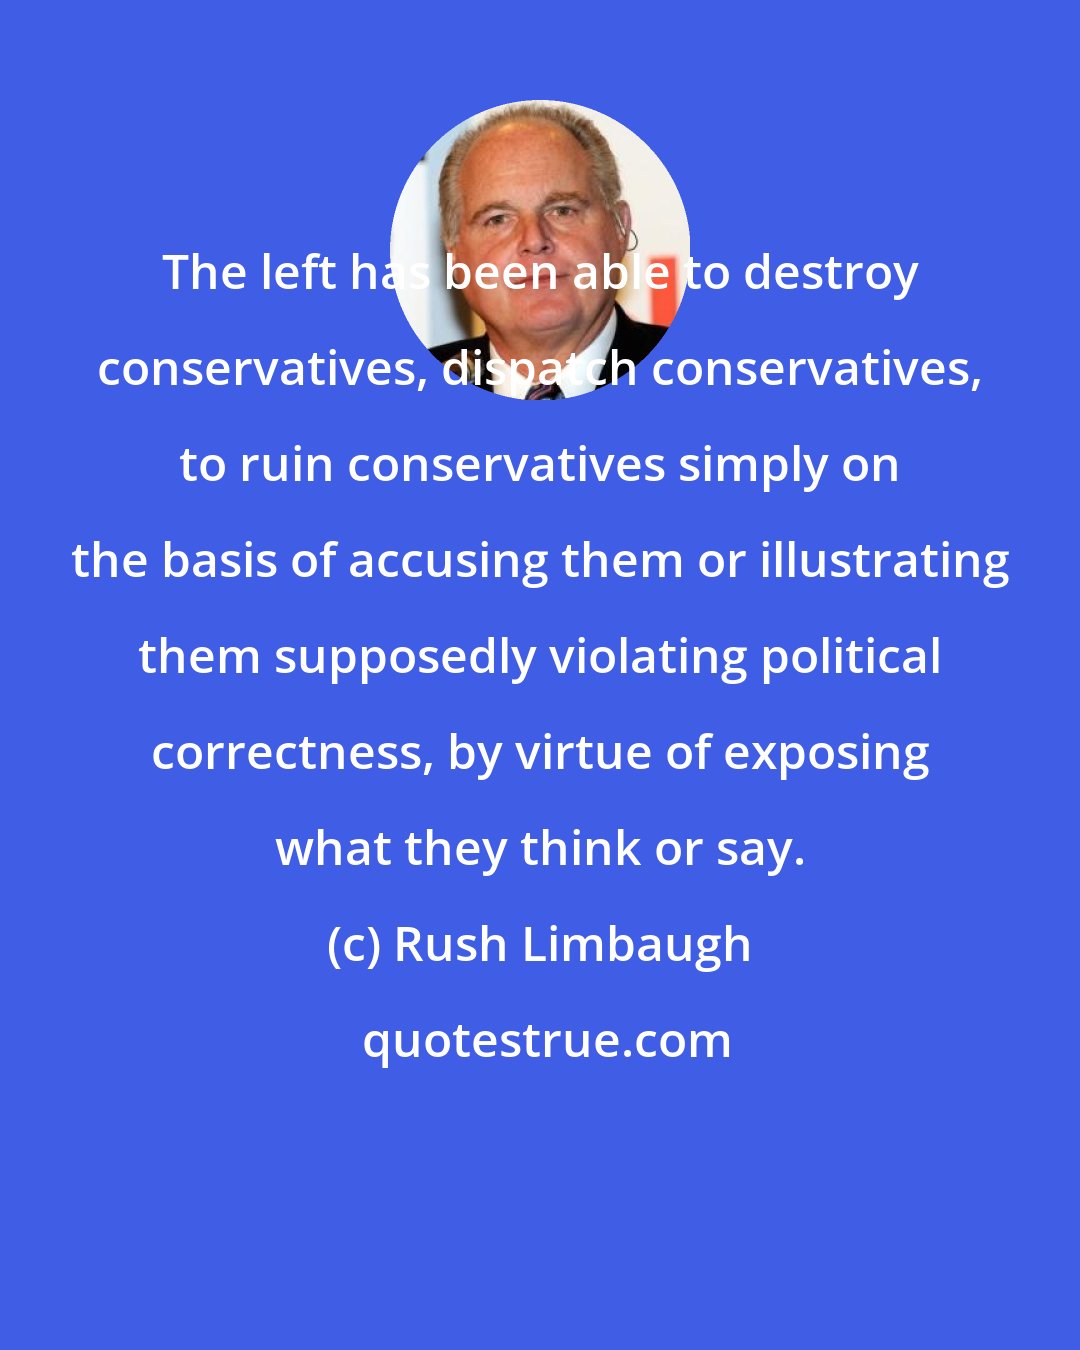 Rush Limbaugh: The left has been able to destroy conservatives, dispatch conservatives, to ruin conservatives simply on the basis of accusing them or illustrating them supposedly violating political correctness, by virtue of exposing what they think or say.